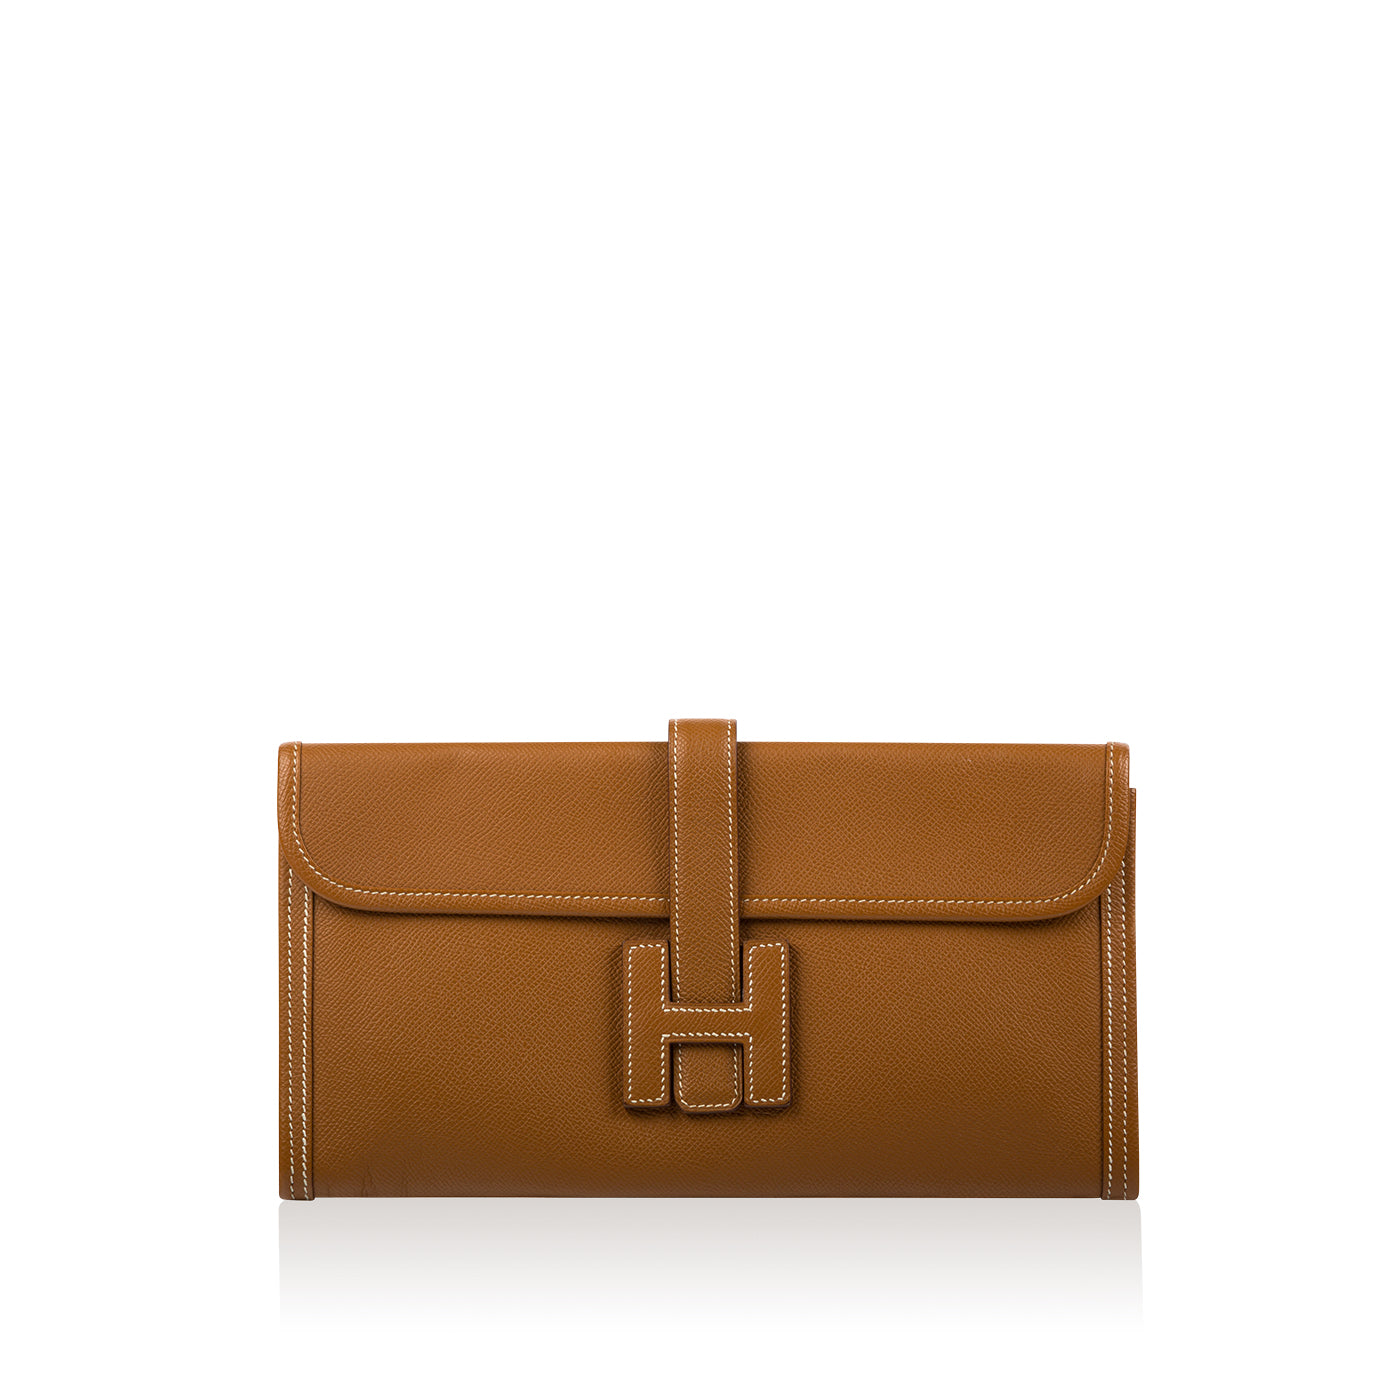 A Short Introduction to the Hermes Jige Elan Clutch